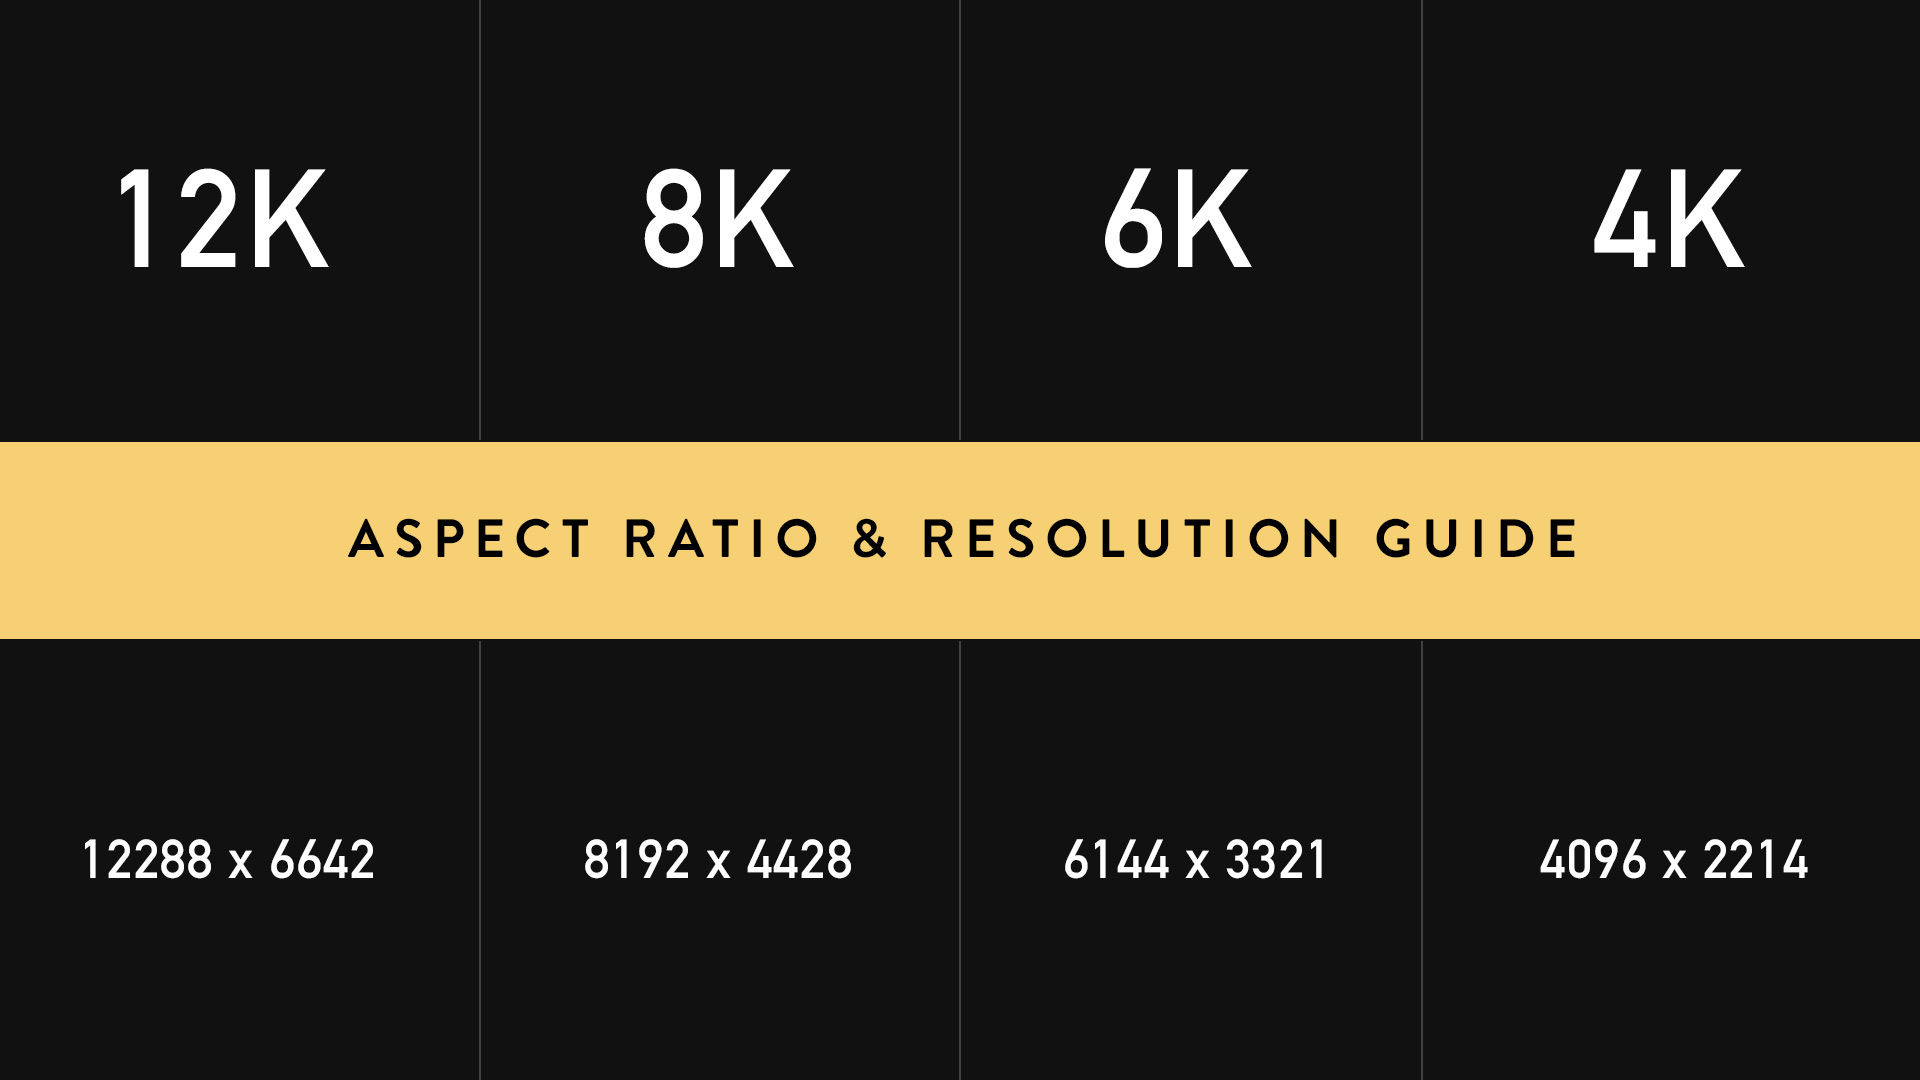 8K, 4K, 2K - What Printer Resolution is Right for YOU? 